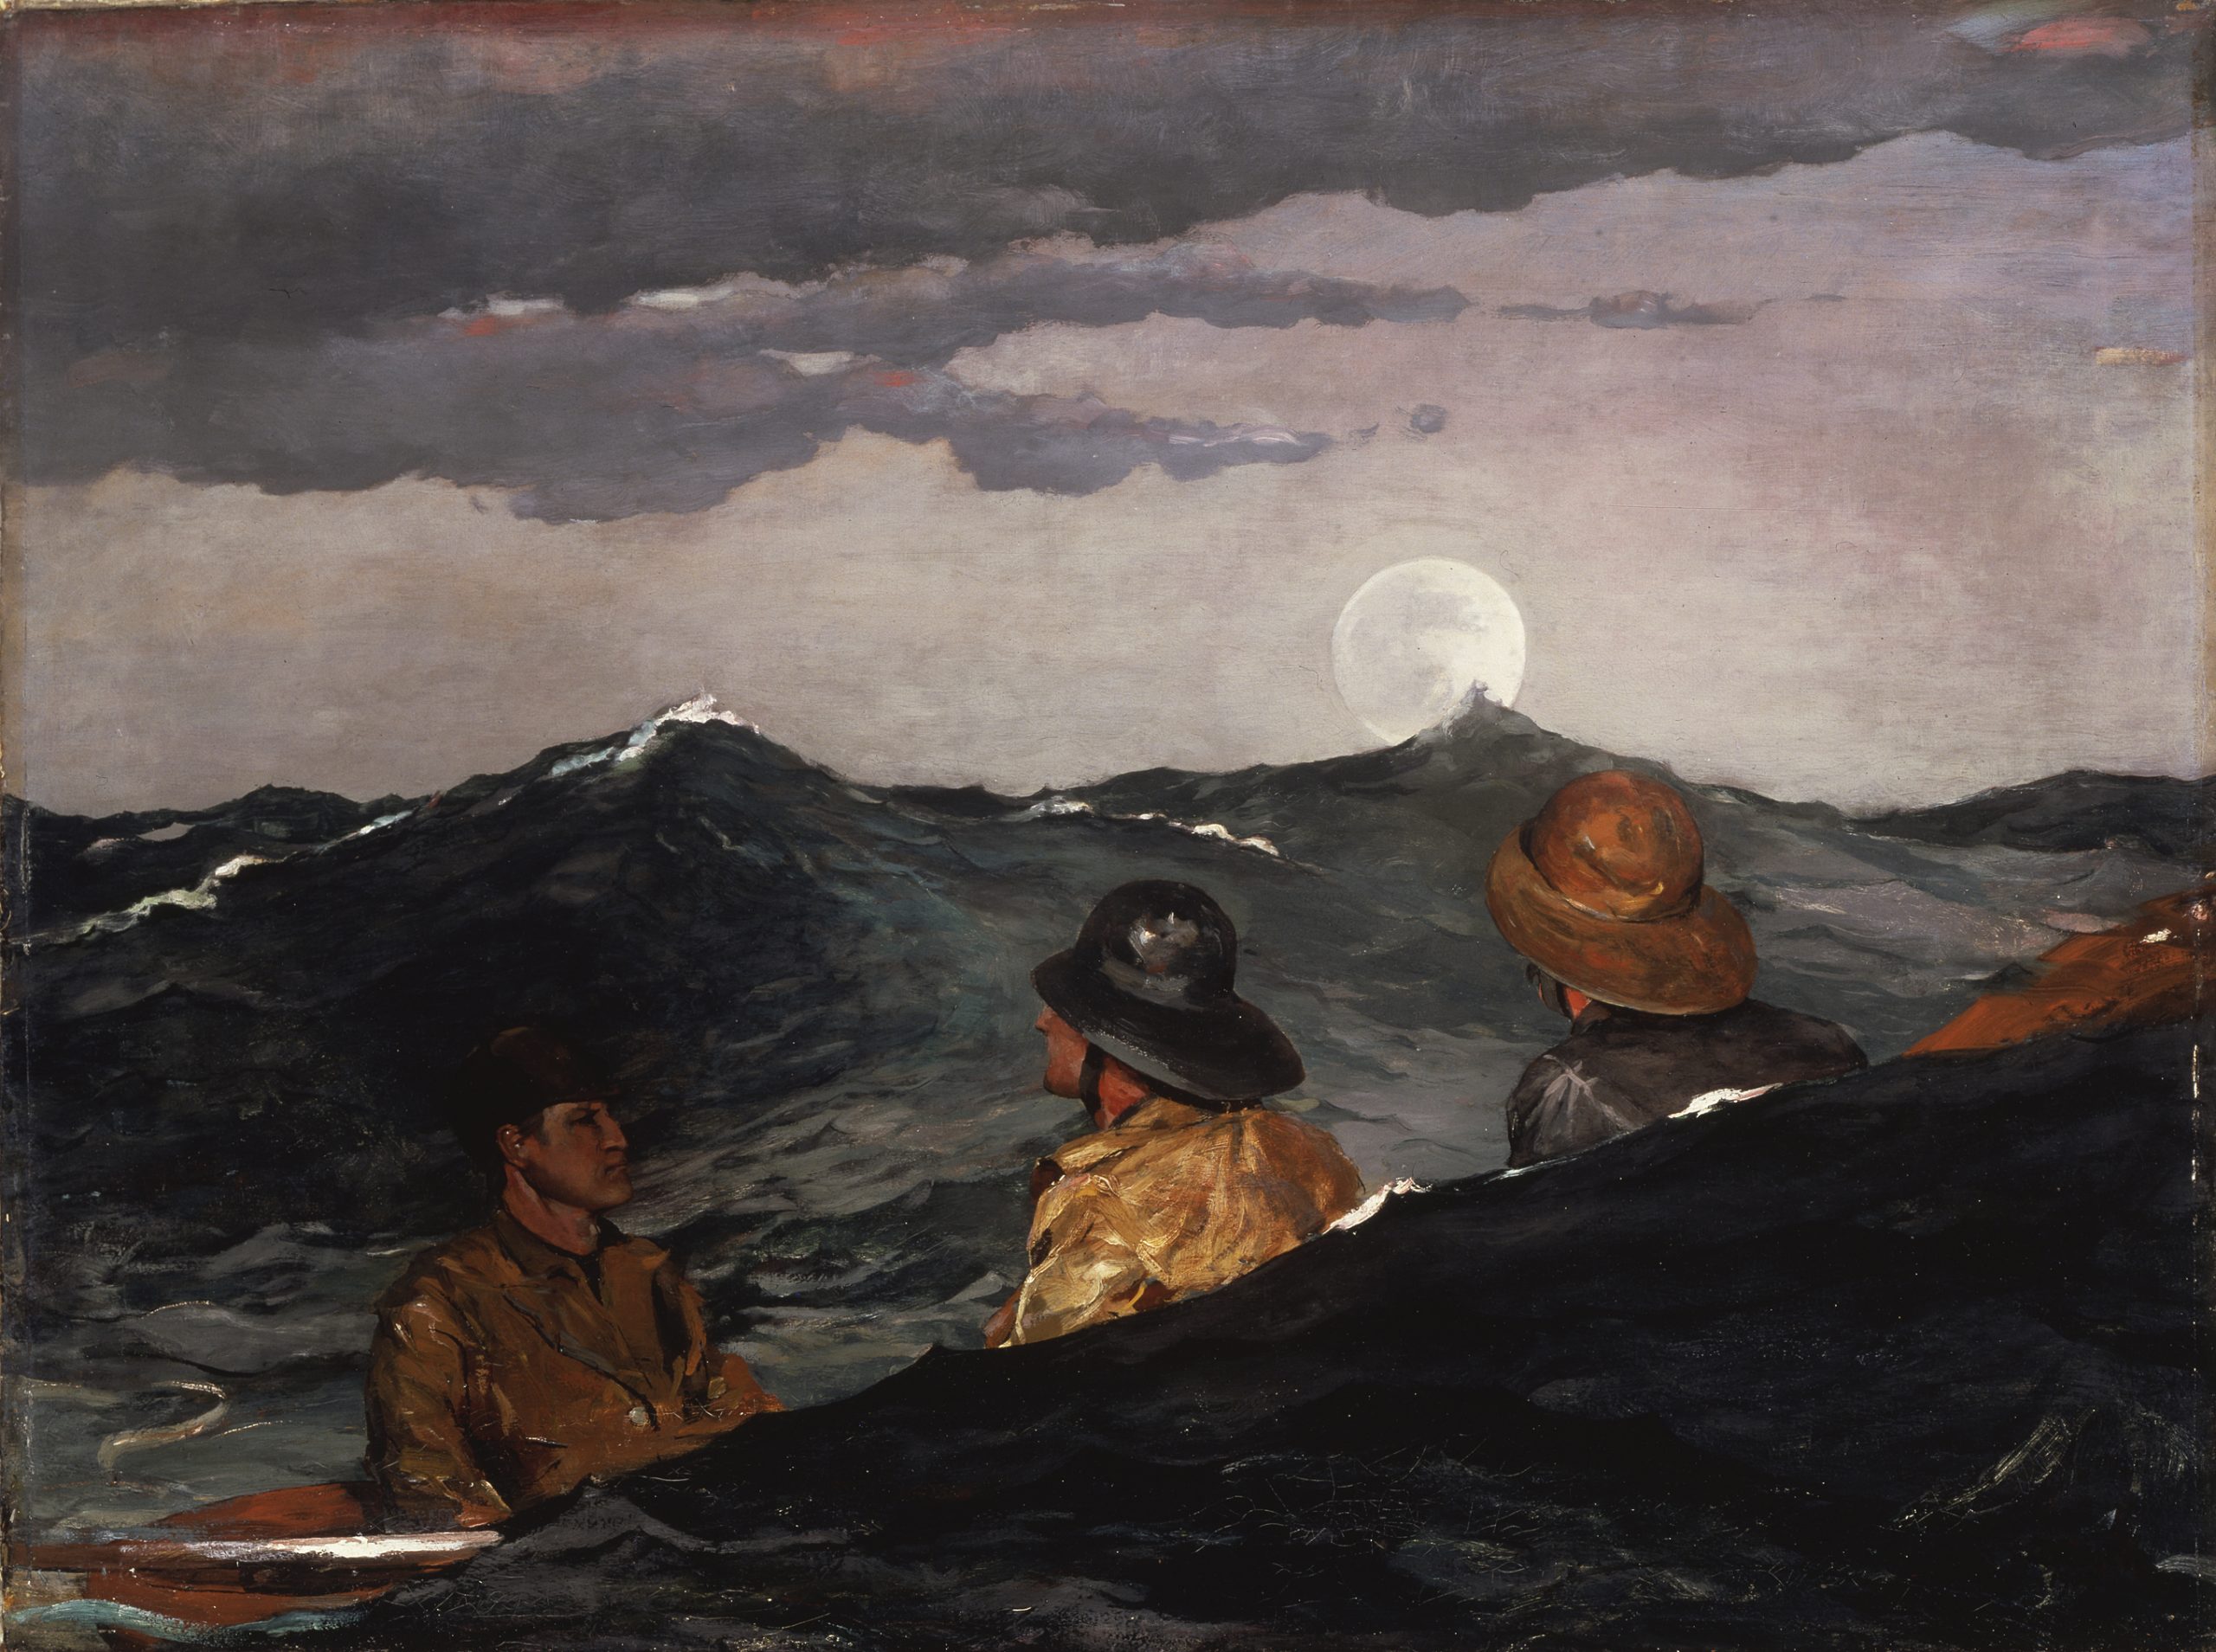 Winslow Homer, Kissing the Moon, 1904, Oil on canvas, 76.8 x 101.6 cm			
Addison Gallery of American Art, Phillips Academy, Andover, Massachusetts
Bequest of Candace C. Stimson, 1946.19
© Addison Gallery of American Art, Phillips Academy, Andover, Massachusetts